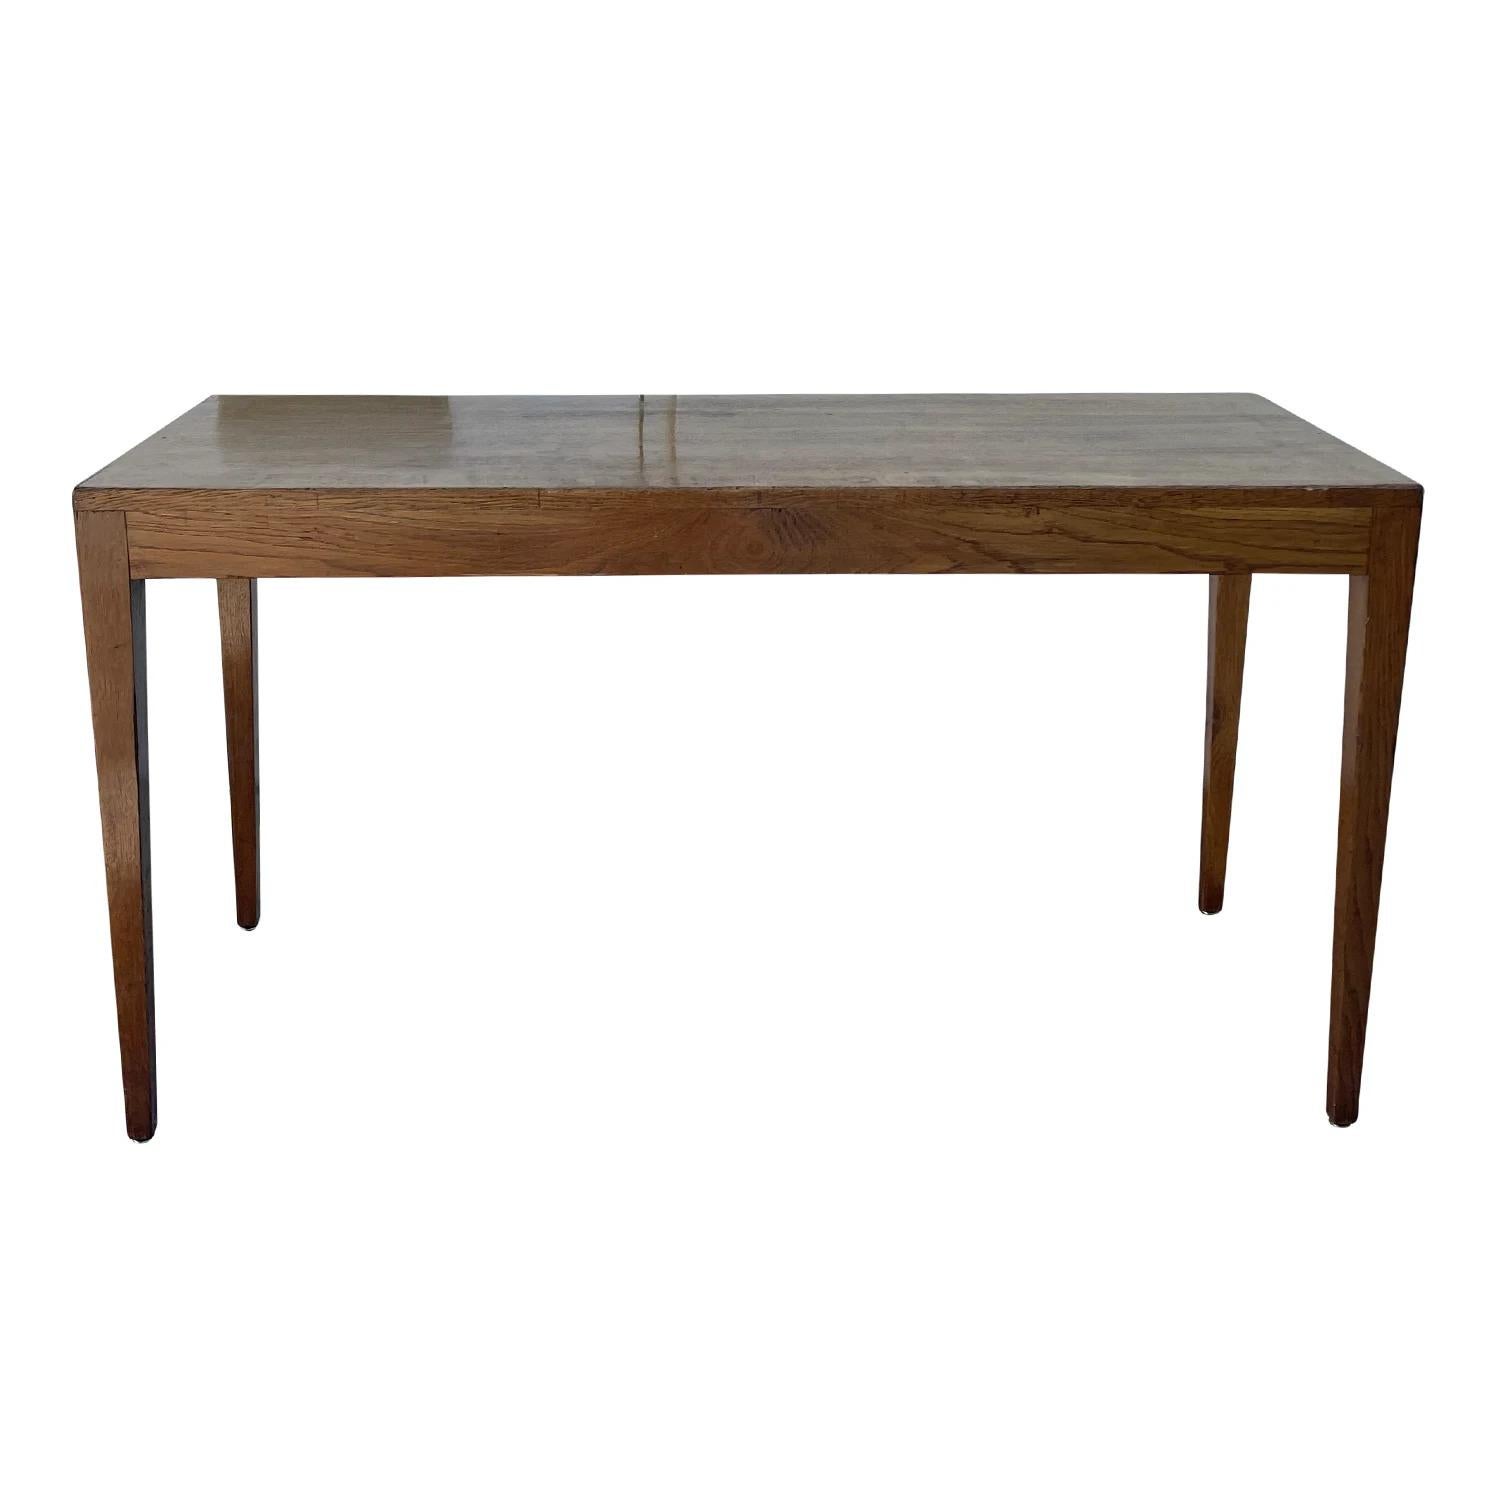 A light-brow, vintage French Art Deco freestanding console table made of hand crafted polished Oakwood, designed most likely by Jean-Michel Frank in good condition. The rectangular side, end table is standing on four long square legs. Wear